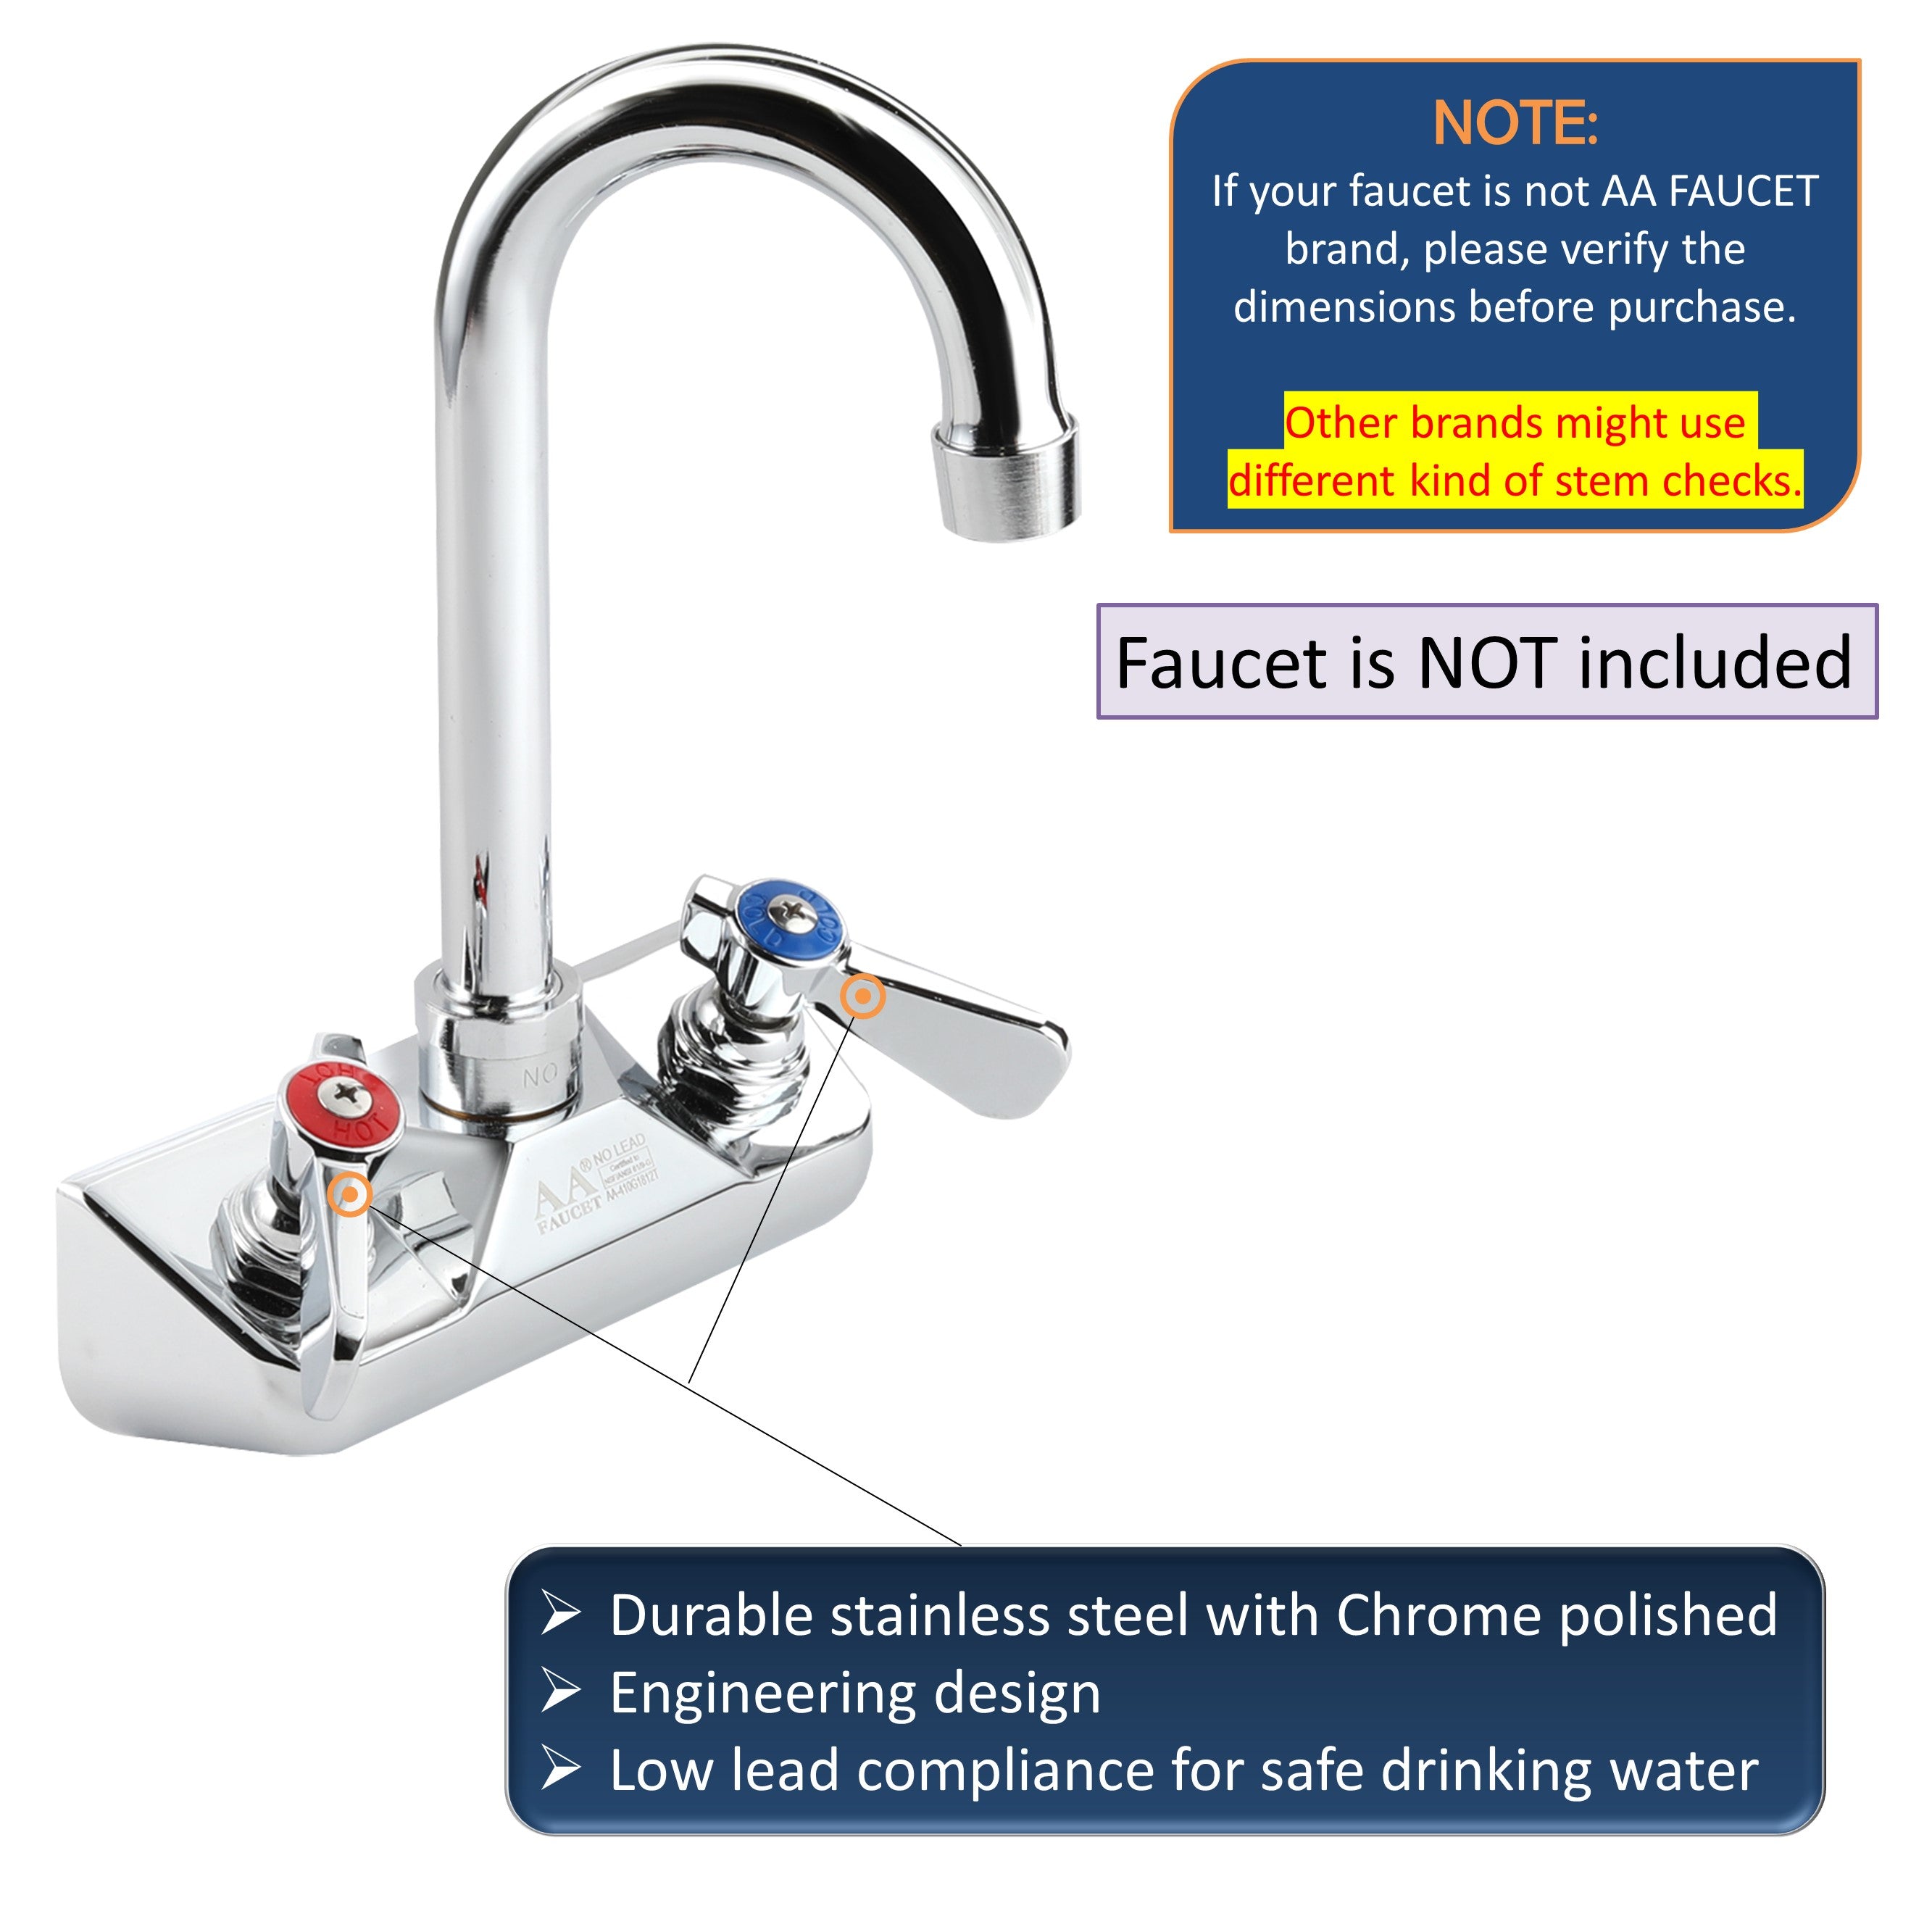 AA Faucet Replacement Stem Check for 4" Hand Sink Faucets